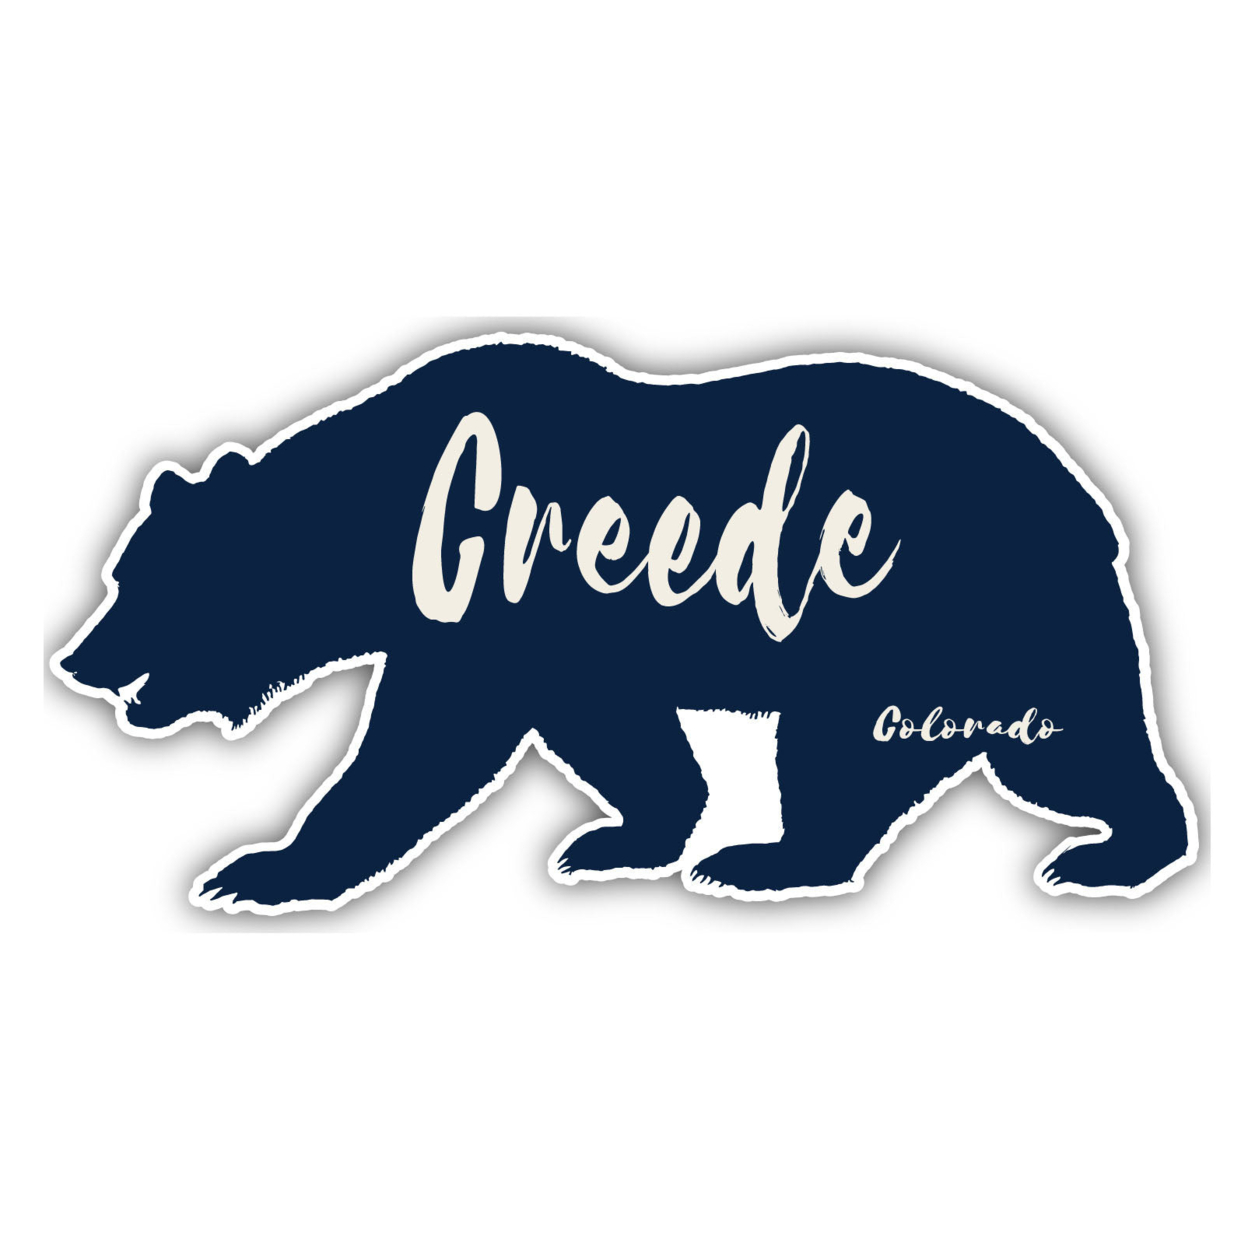 Creede Colorado Souvenir Decorative Stickers (Choose Theme And Size) - 4-Pack, 8-Inch, Bear